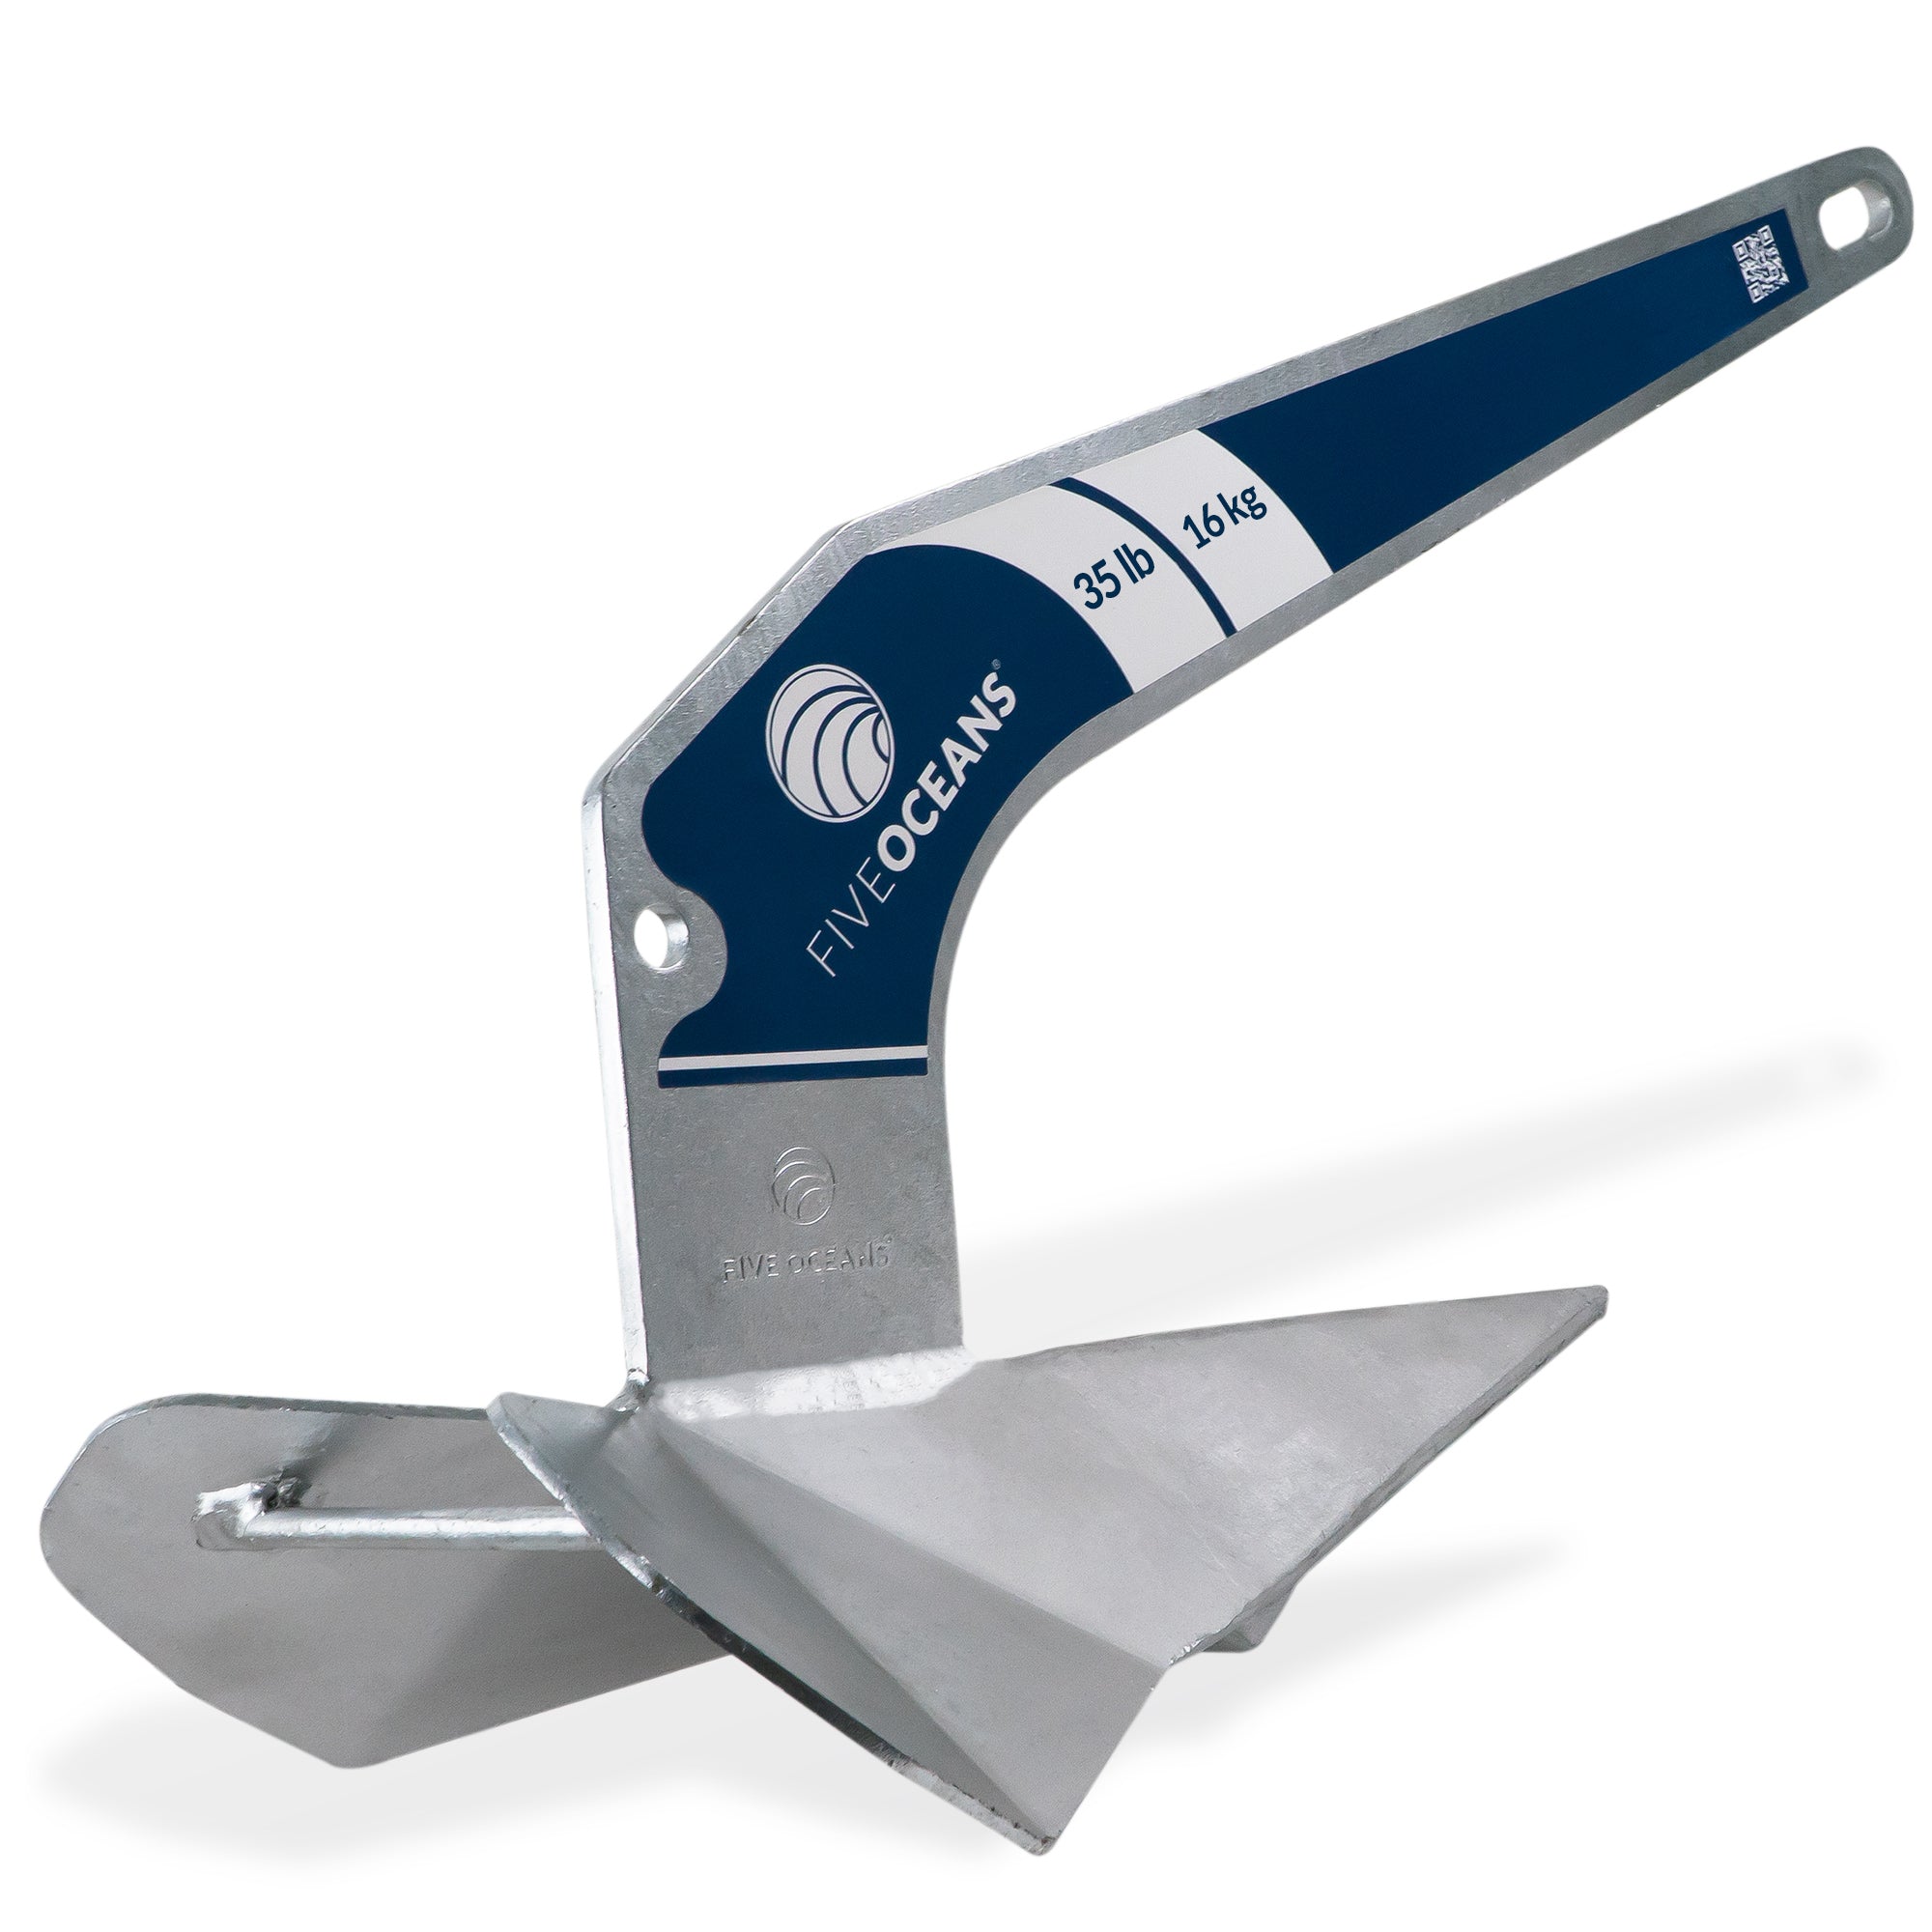 Delta Style Wing Anchor, 35 Lb Hot Dipped Galvanized Steel - FO3687